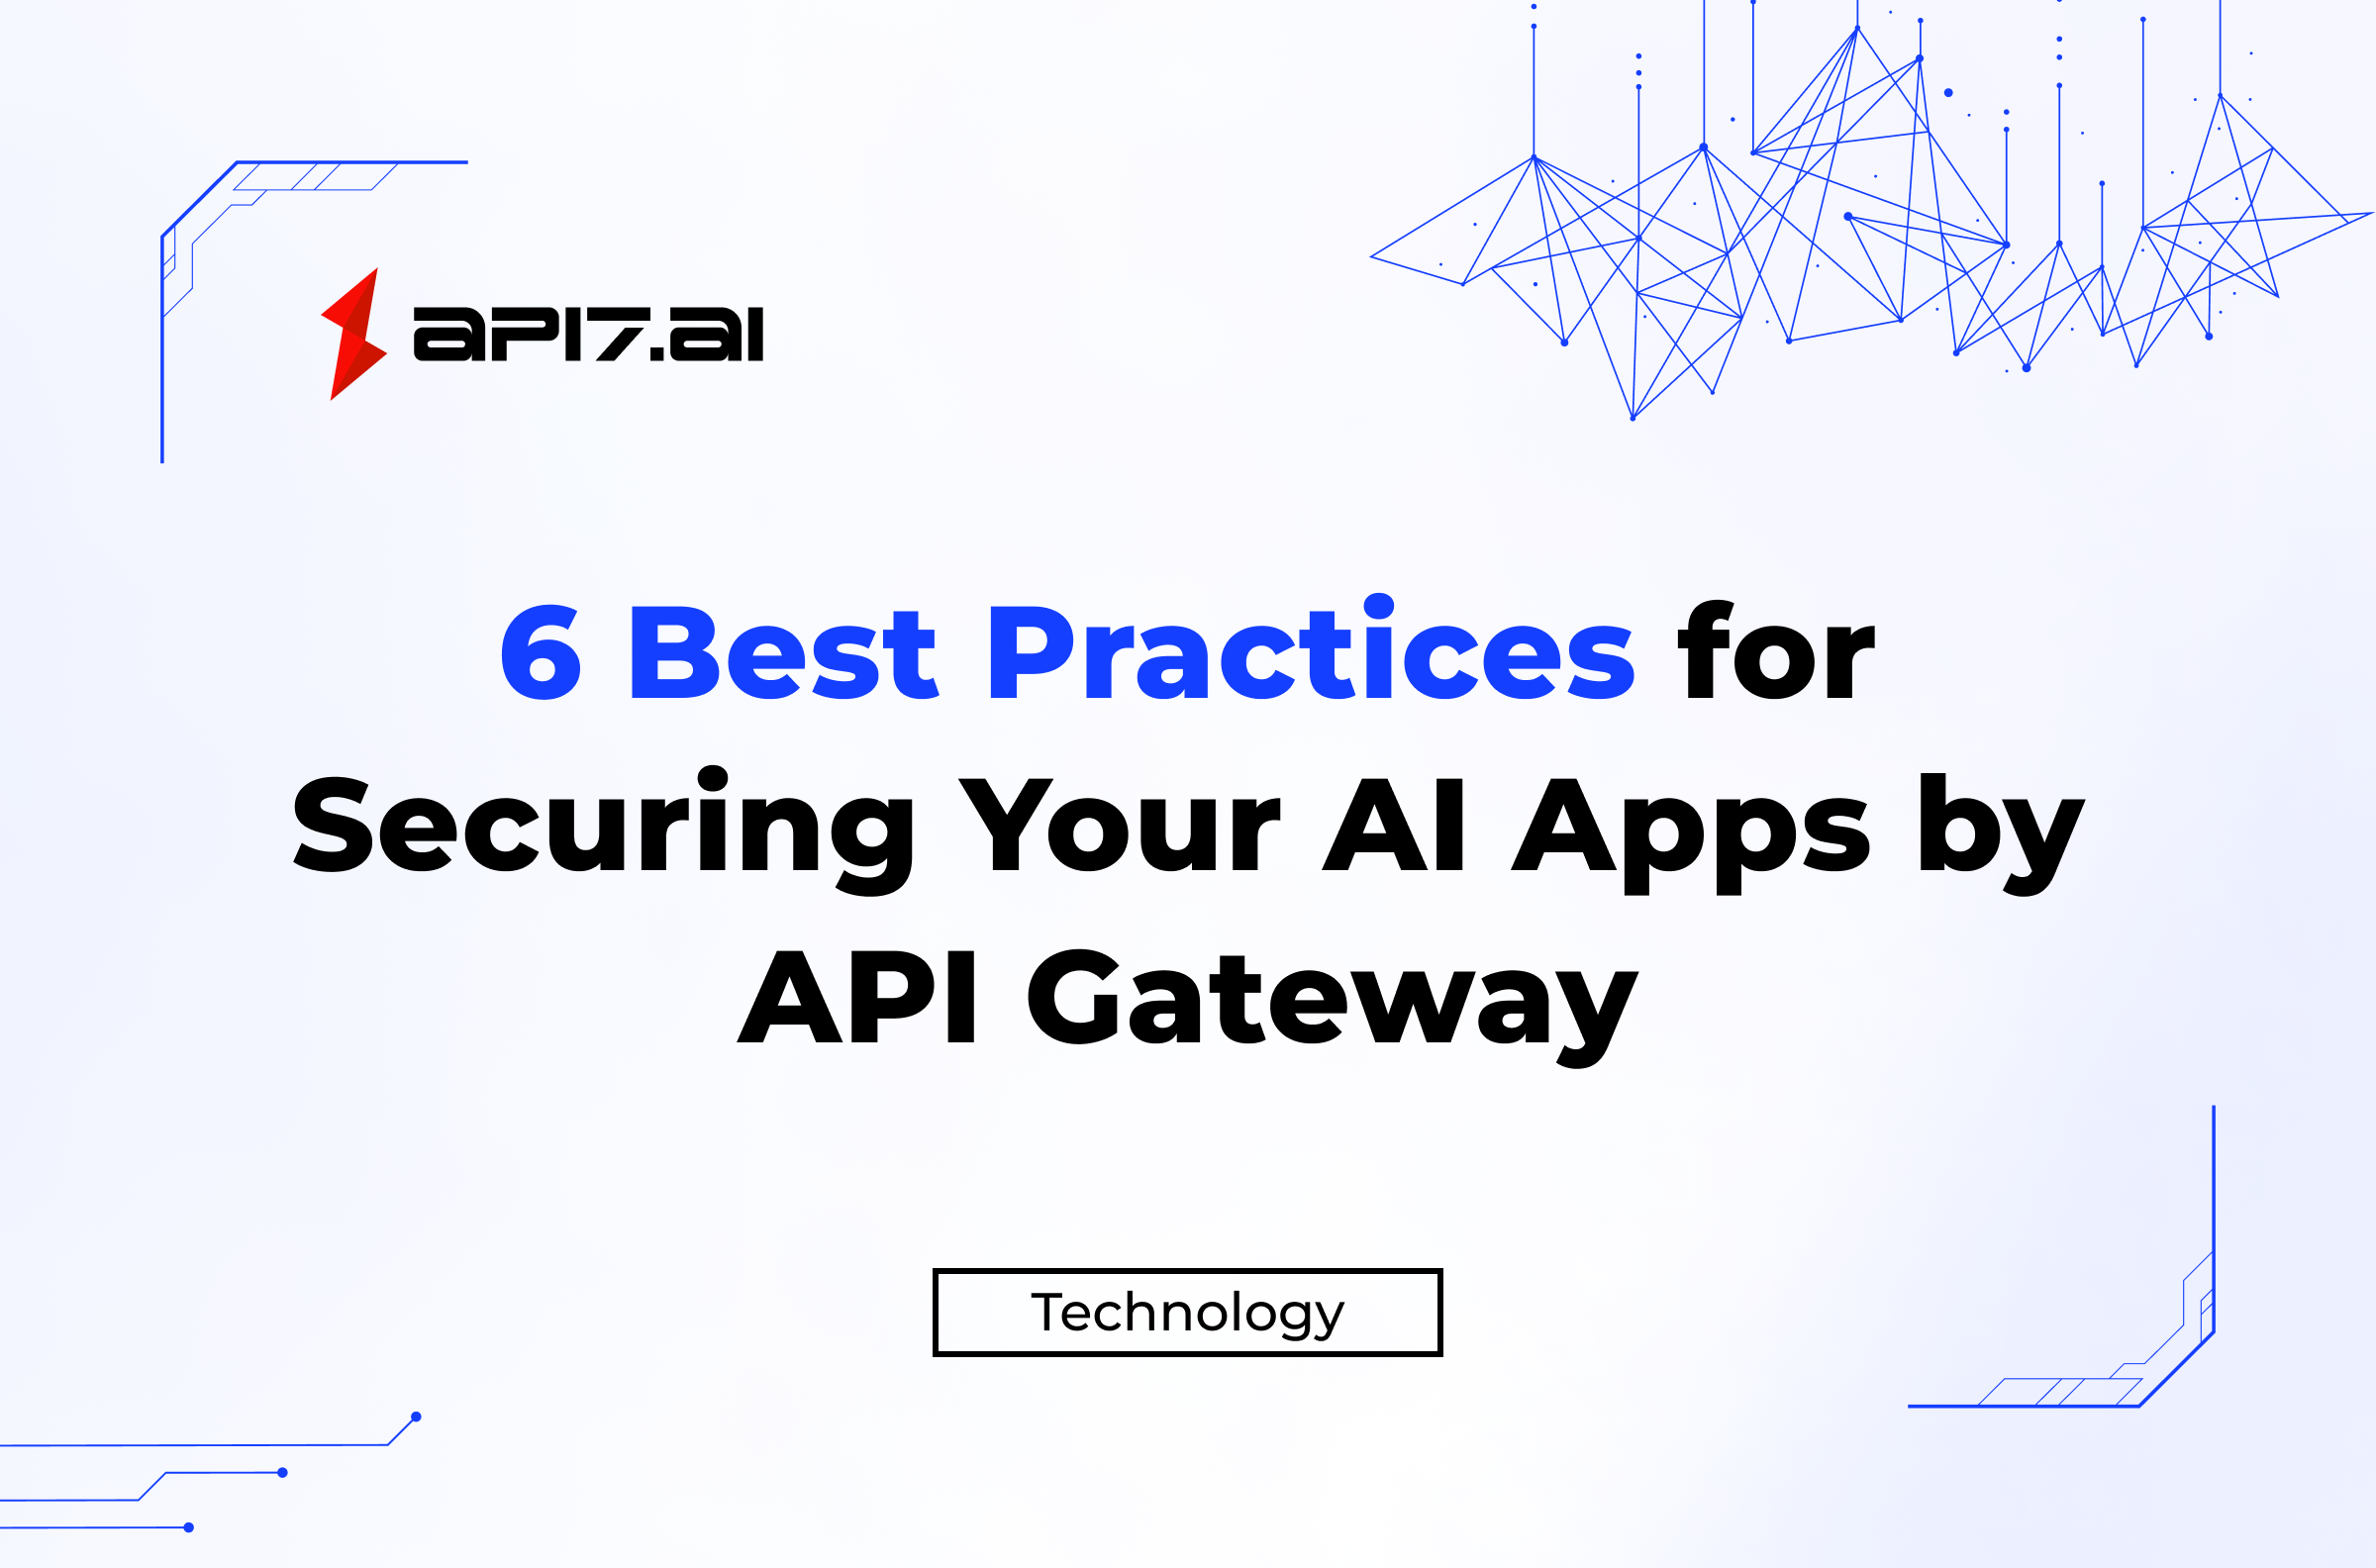 6 Best Practices for Securing Your AI Apps by API Gateway